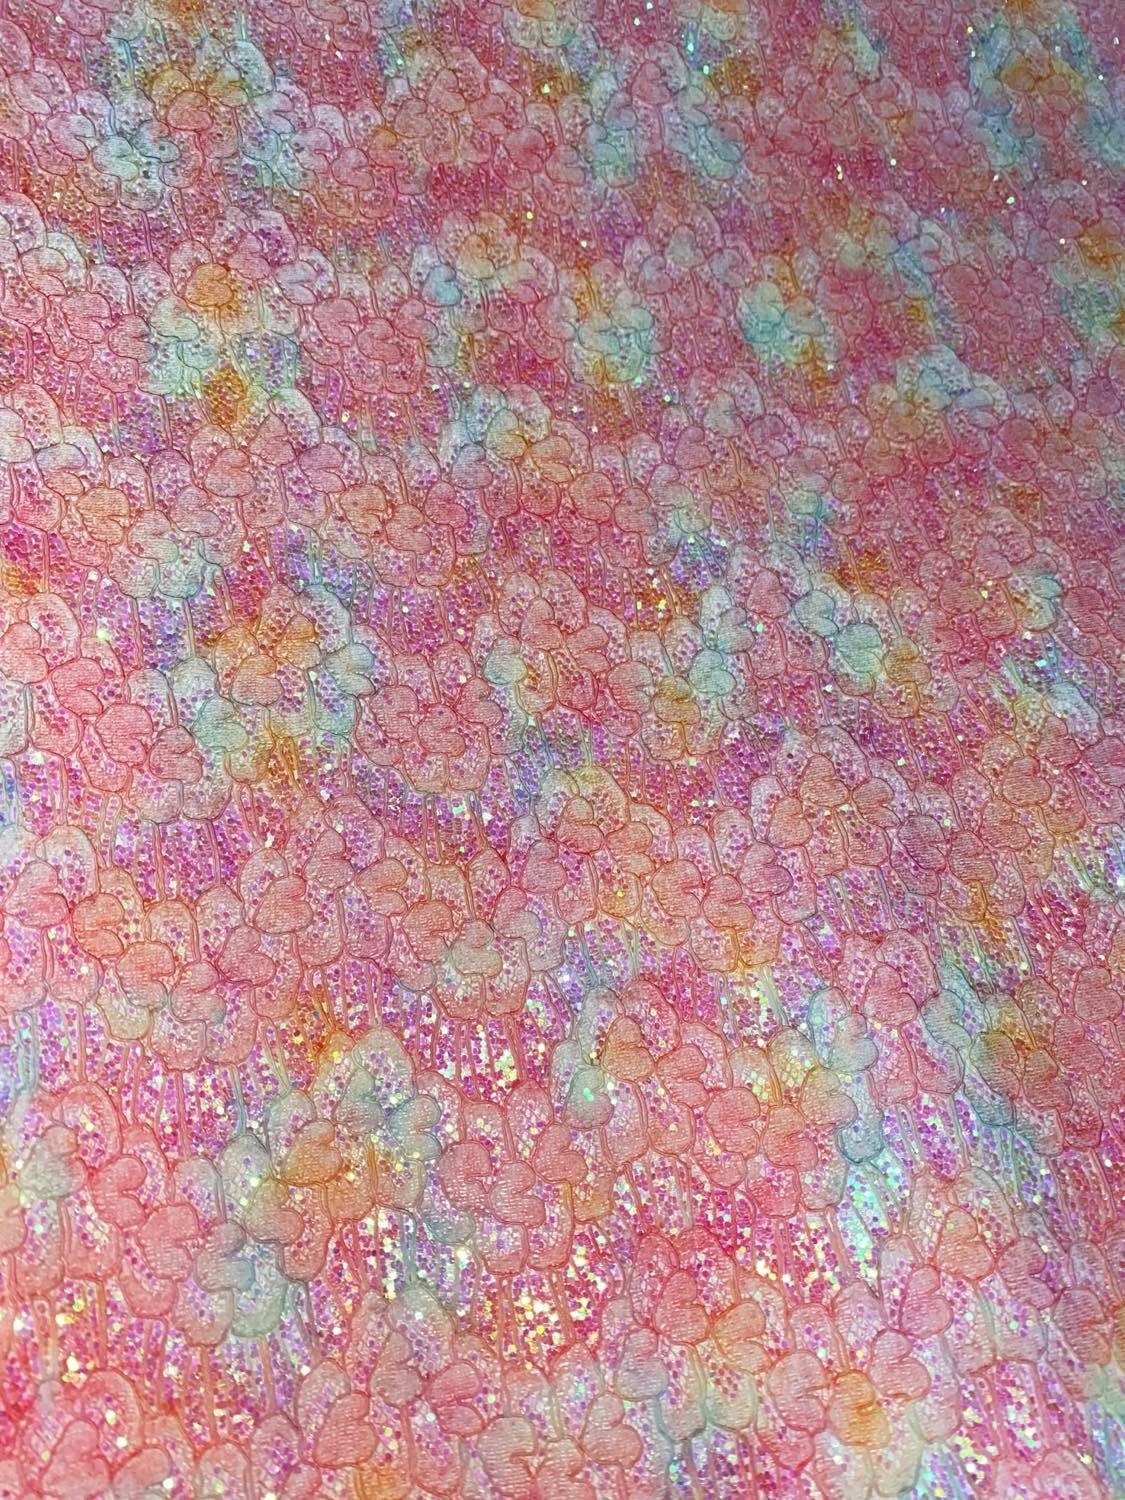 RETAIL Lace Over Glitter Watercolor .8mm Soft Back VINYL